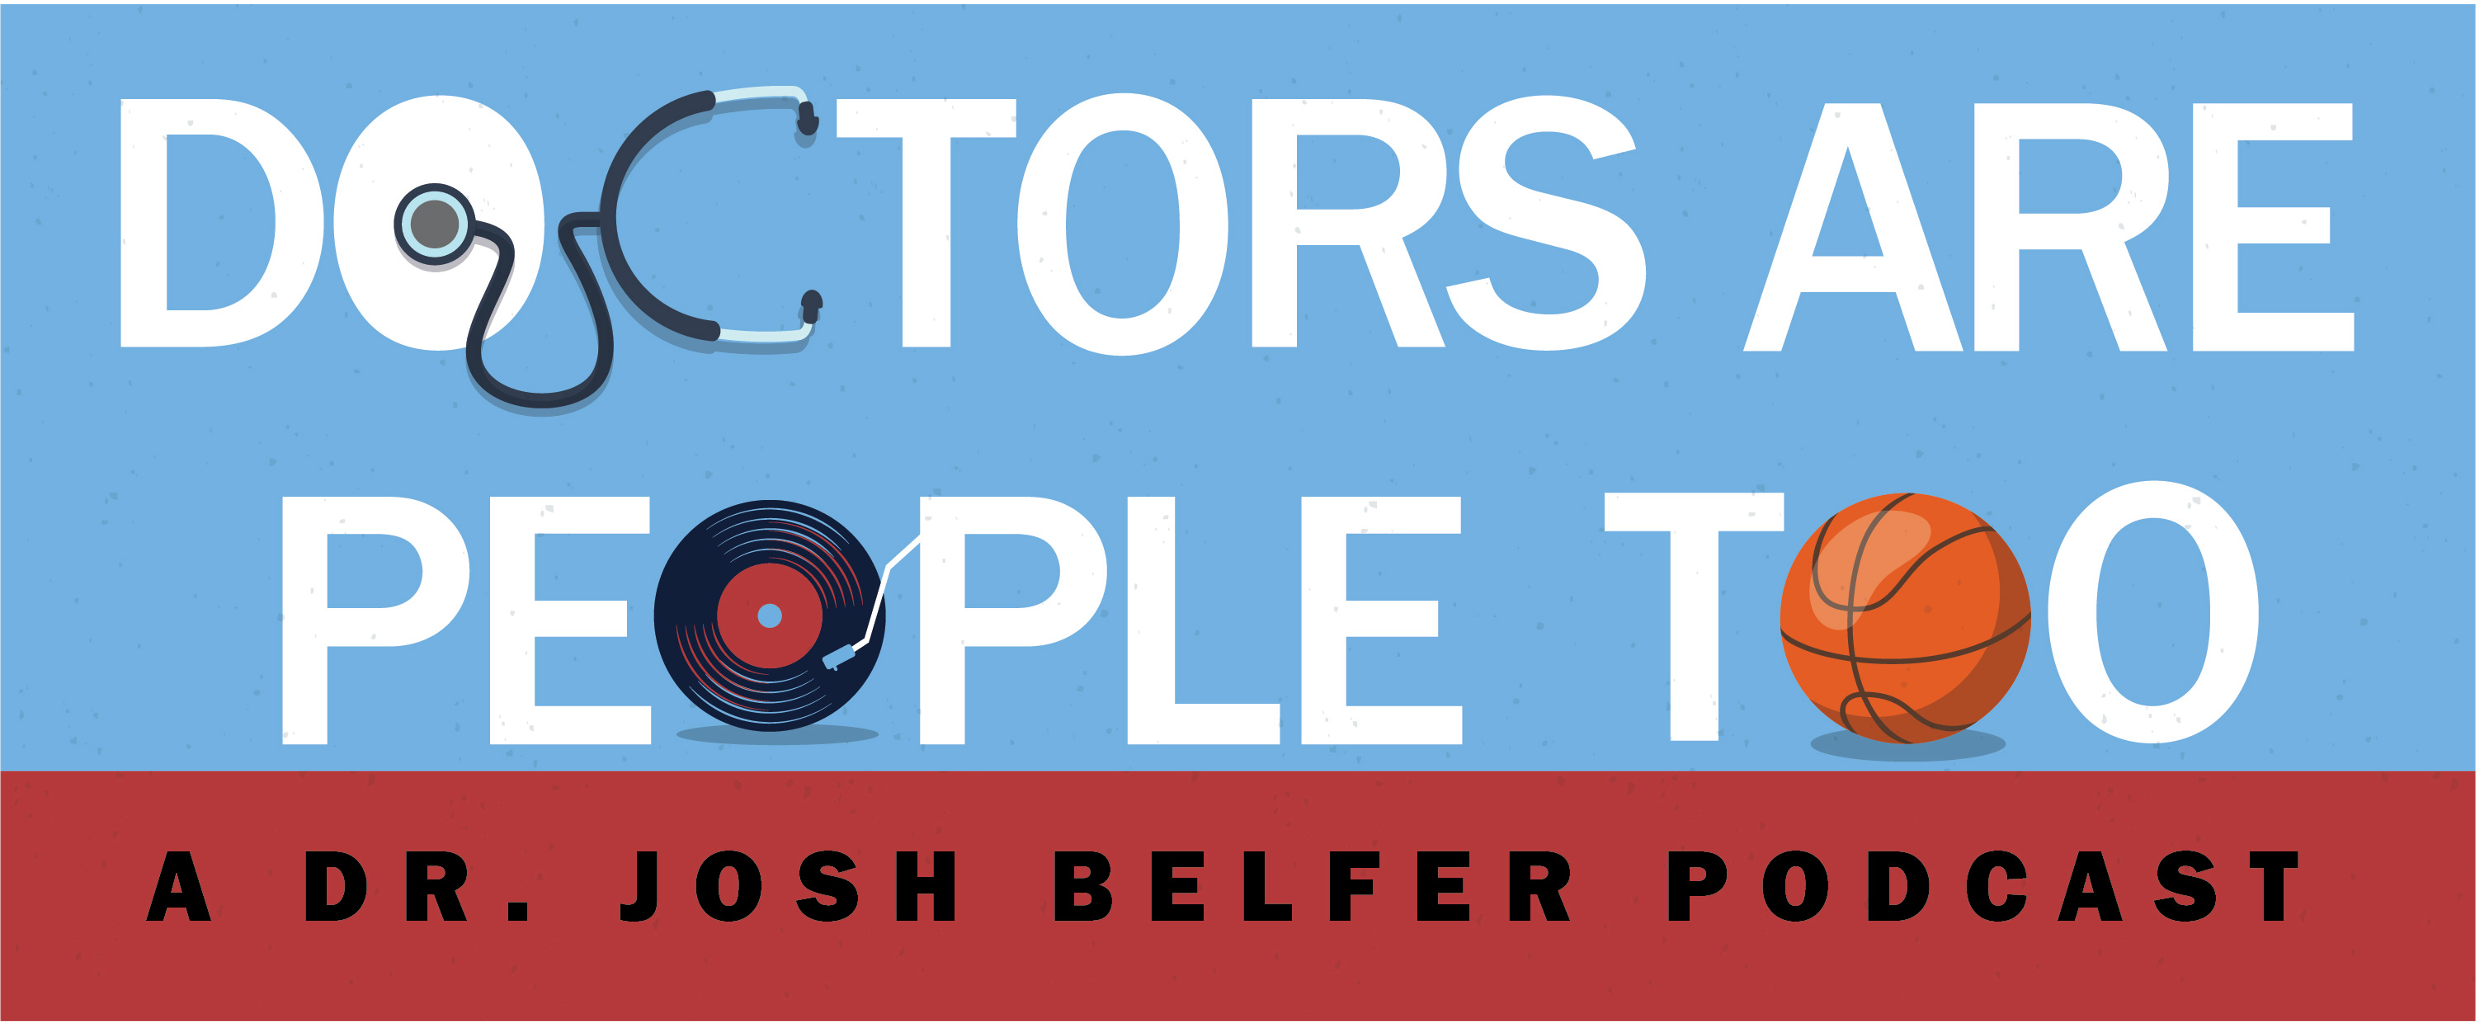 Doctors Are People Too Podcast